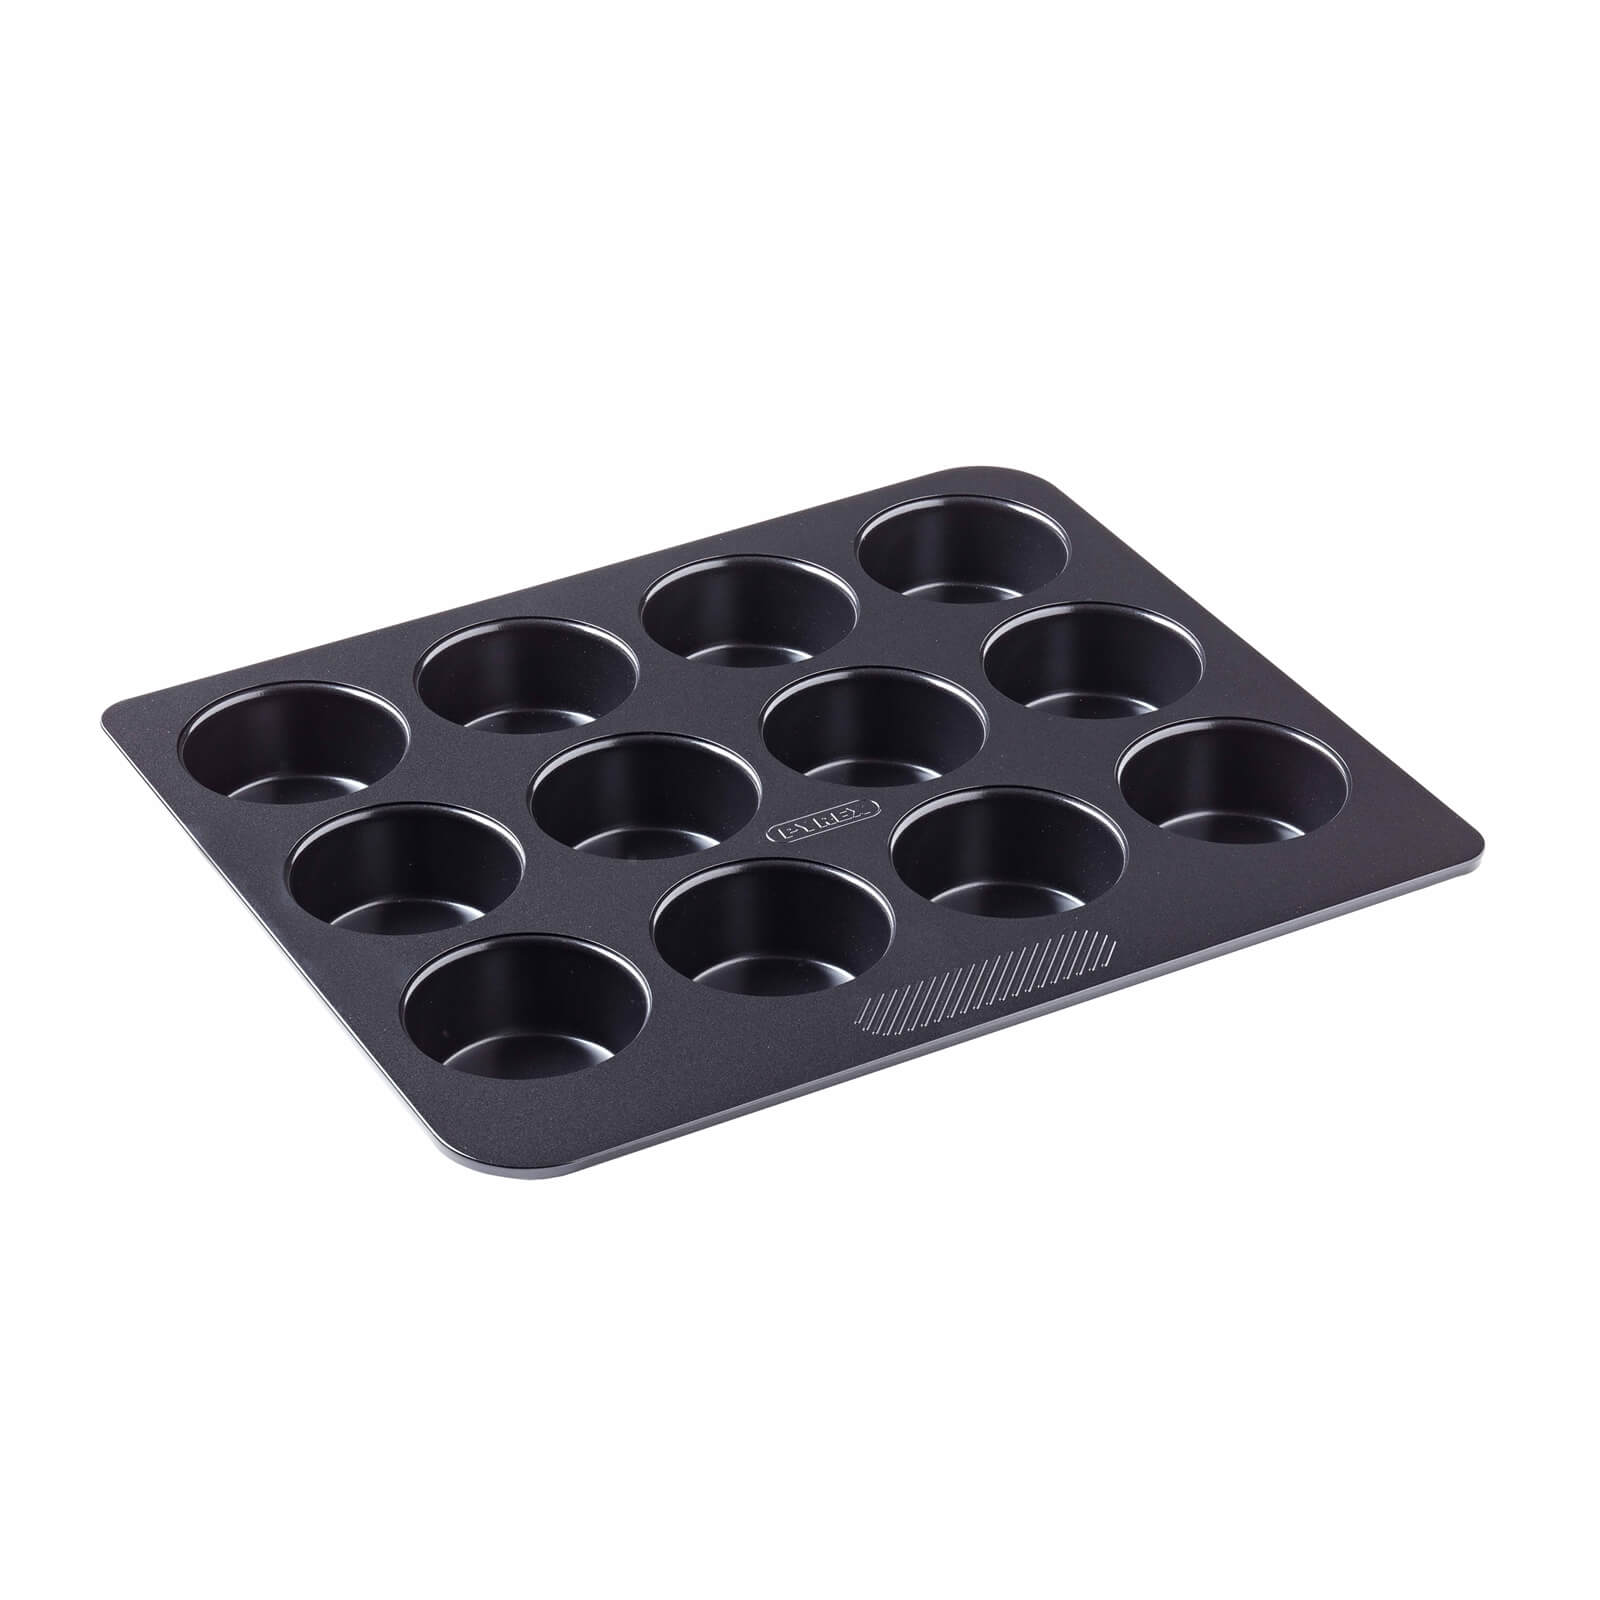 Pyrex Magic 12 Cup Muffin Tray